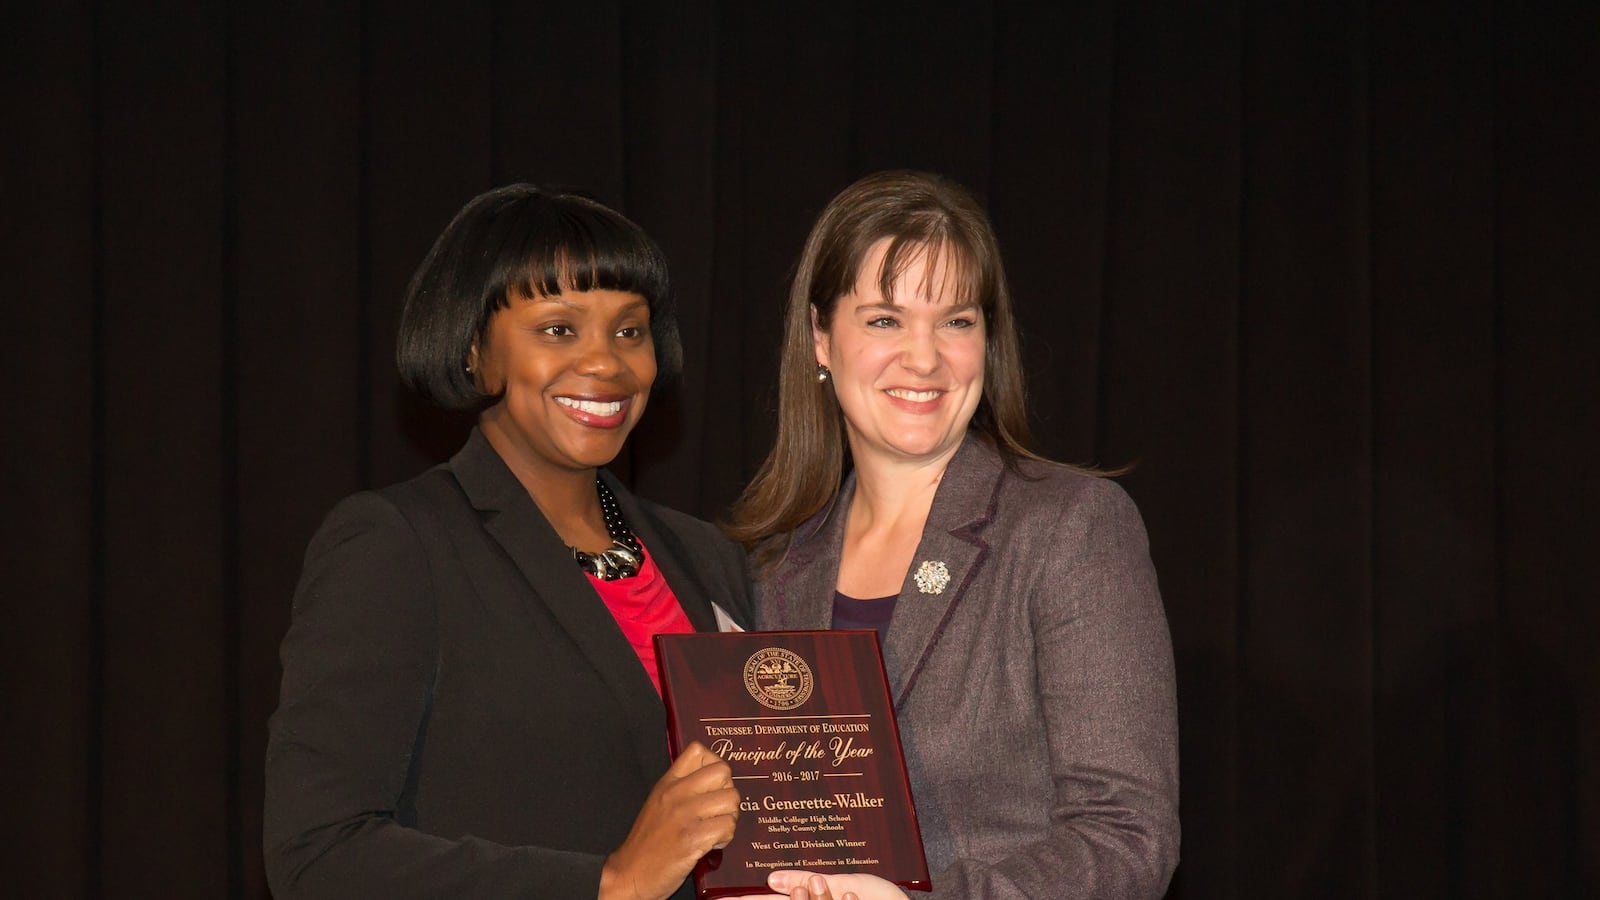 From left: Docia Generette-Walker receives Tennessee's 2016 principal of the year honor from Education Commissioner Candice McQueen. Generette-Walker leads Middle College High School in Memphis.